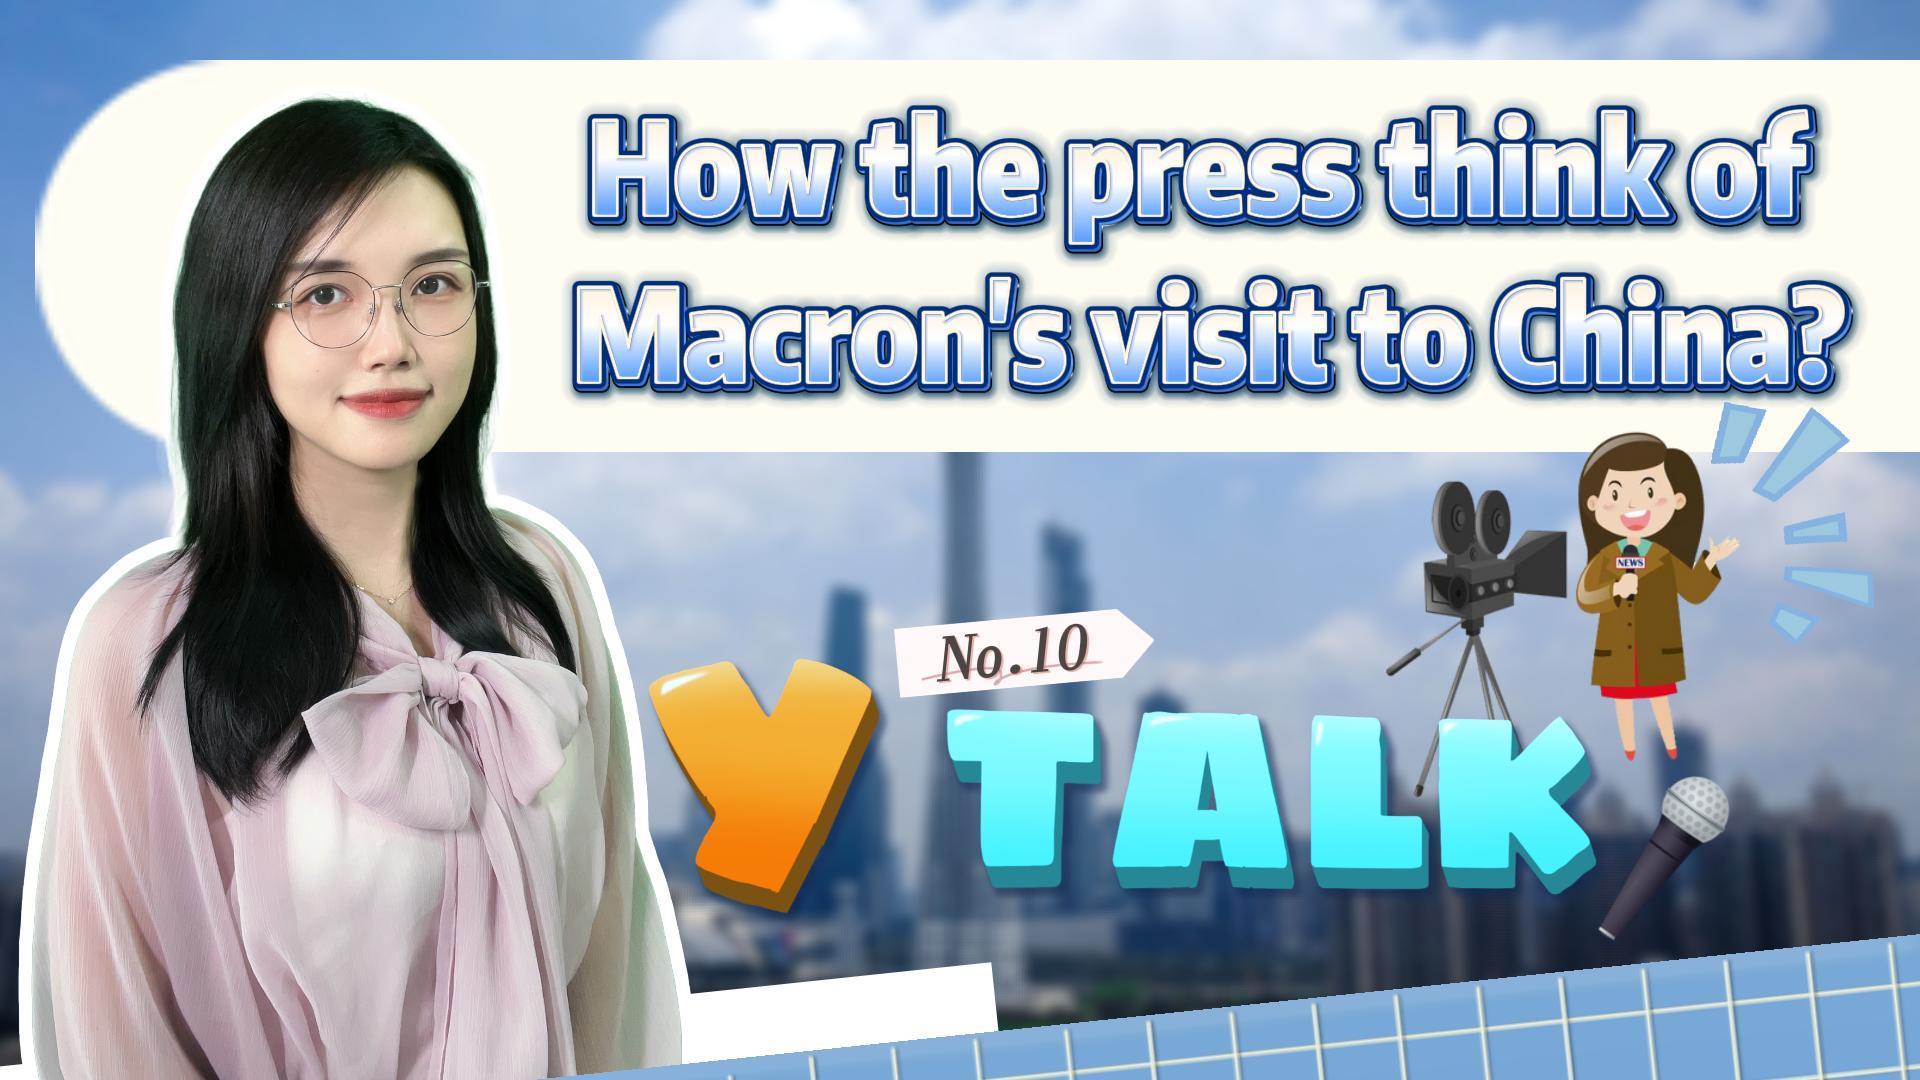 Y Talk⑩｜How the press think of Macron's visit to China? 马克龙来访，外文媒体怎么看？